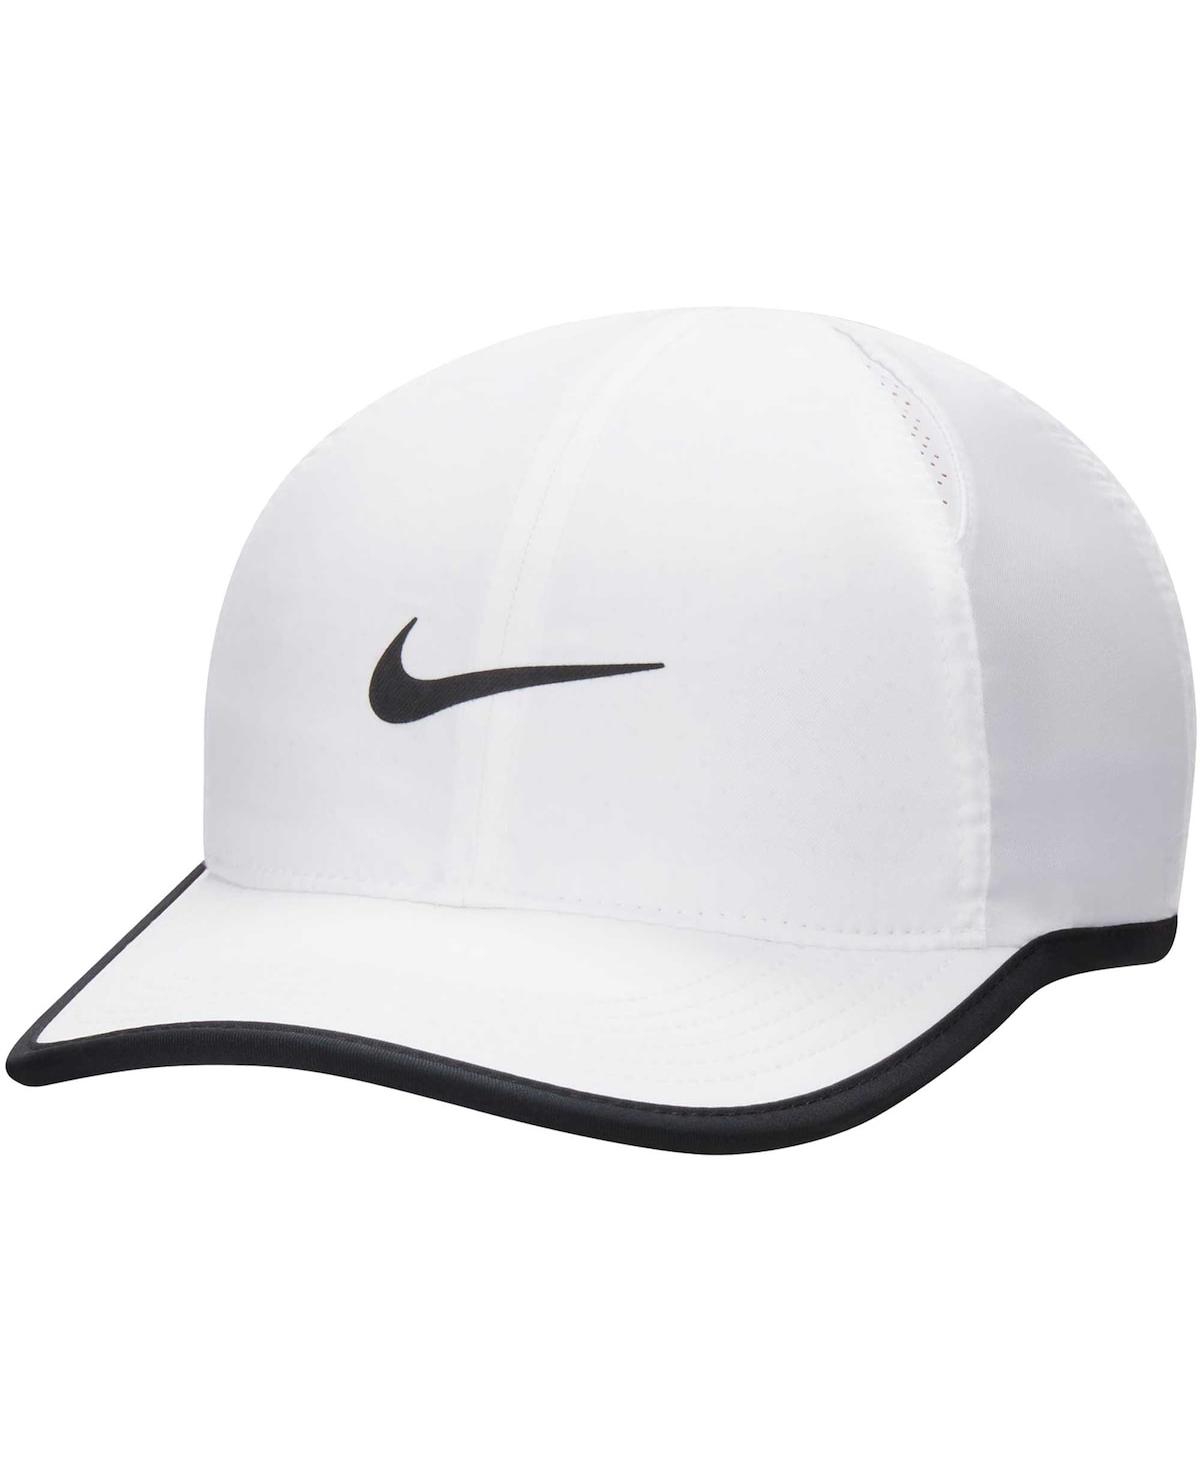 Nike Kids' Youth Boys And Girls  White Featherlight Club Performance Adjustable Hat